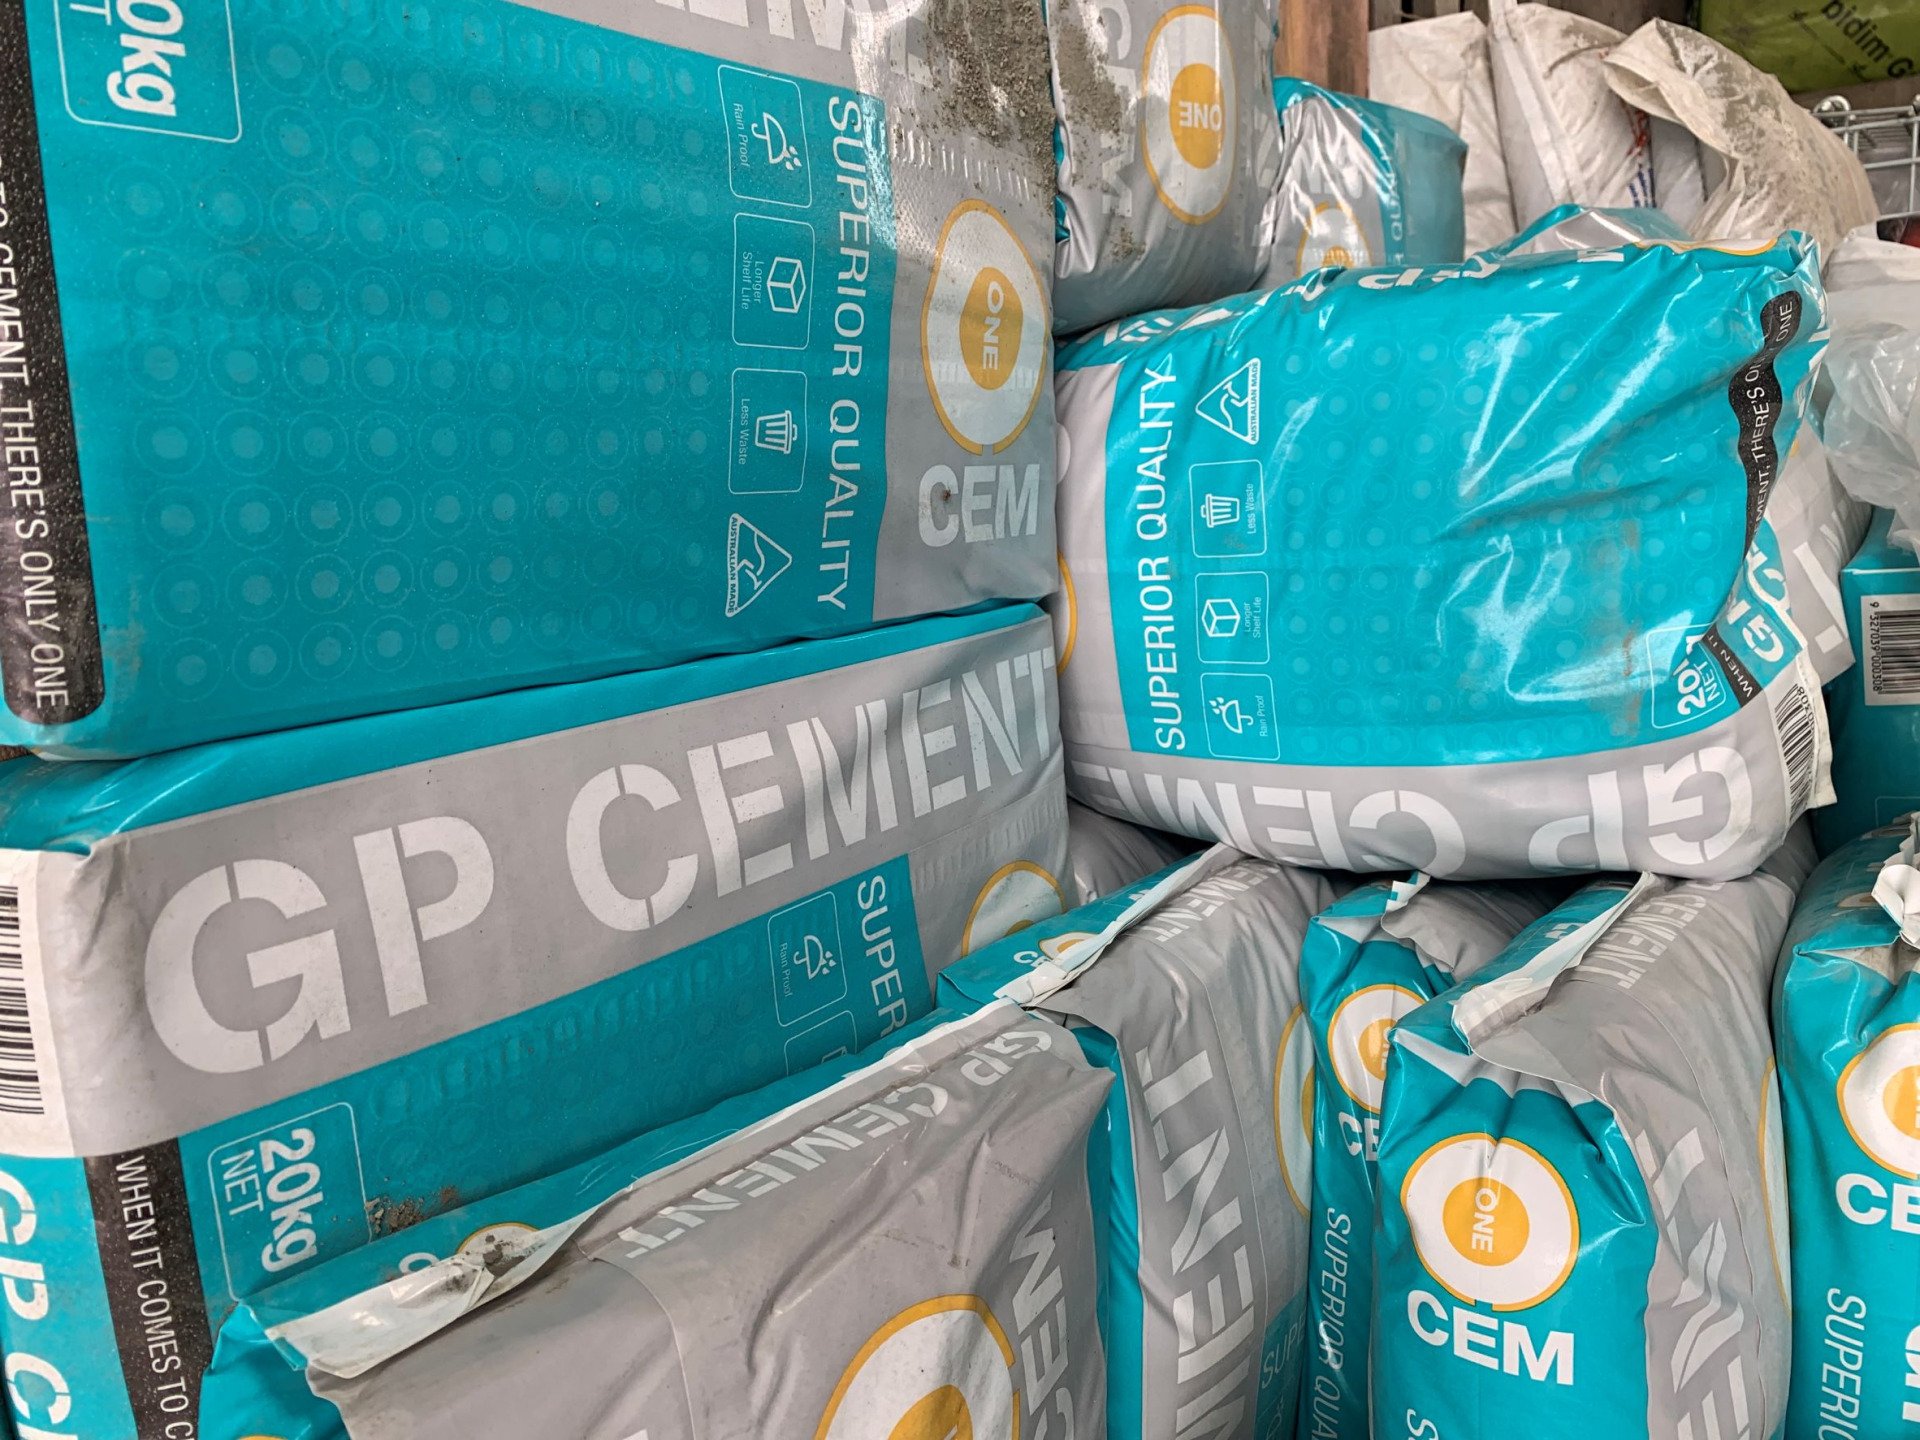 GP Cement — Landscaping Supplies in Maclean, NSW